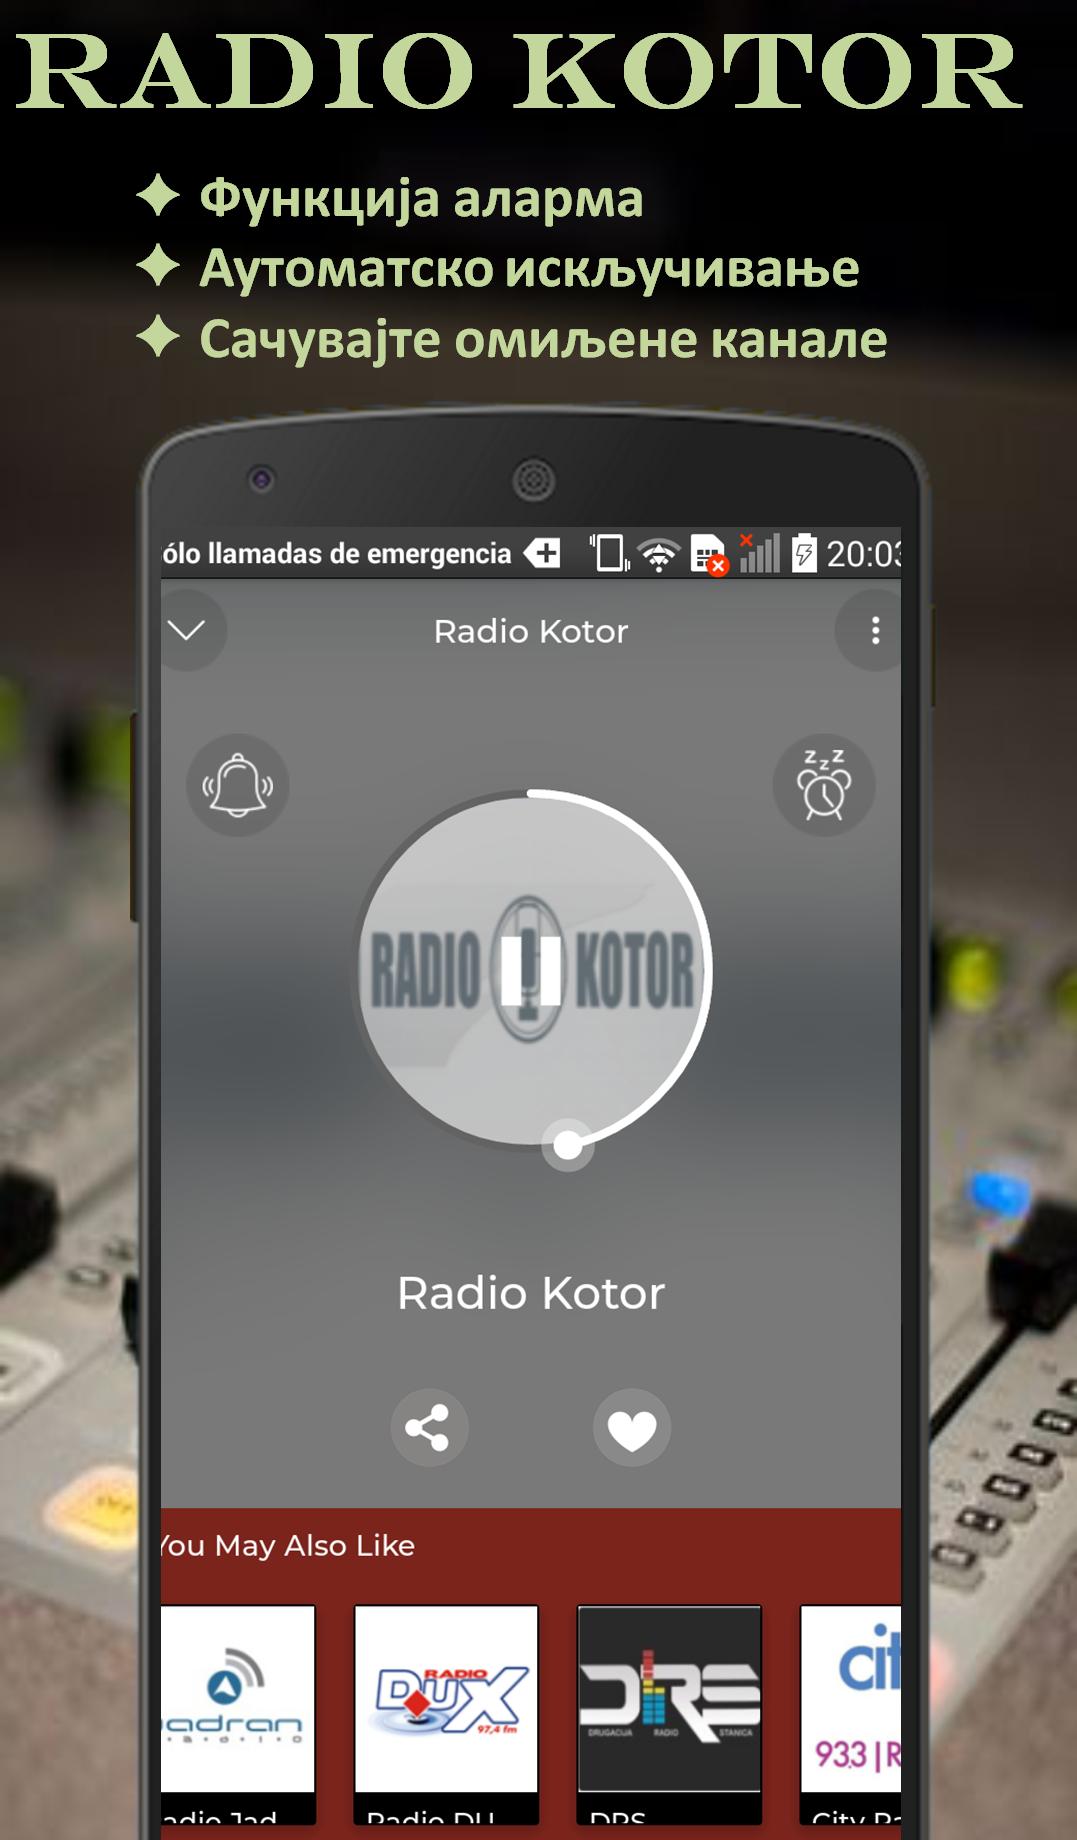 Radio Kotor for Android - APK Download